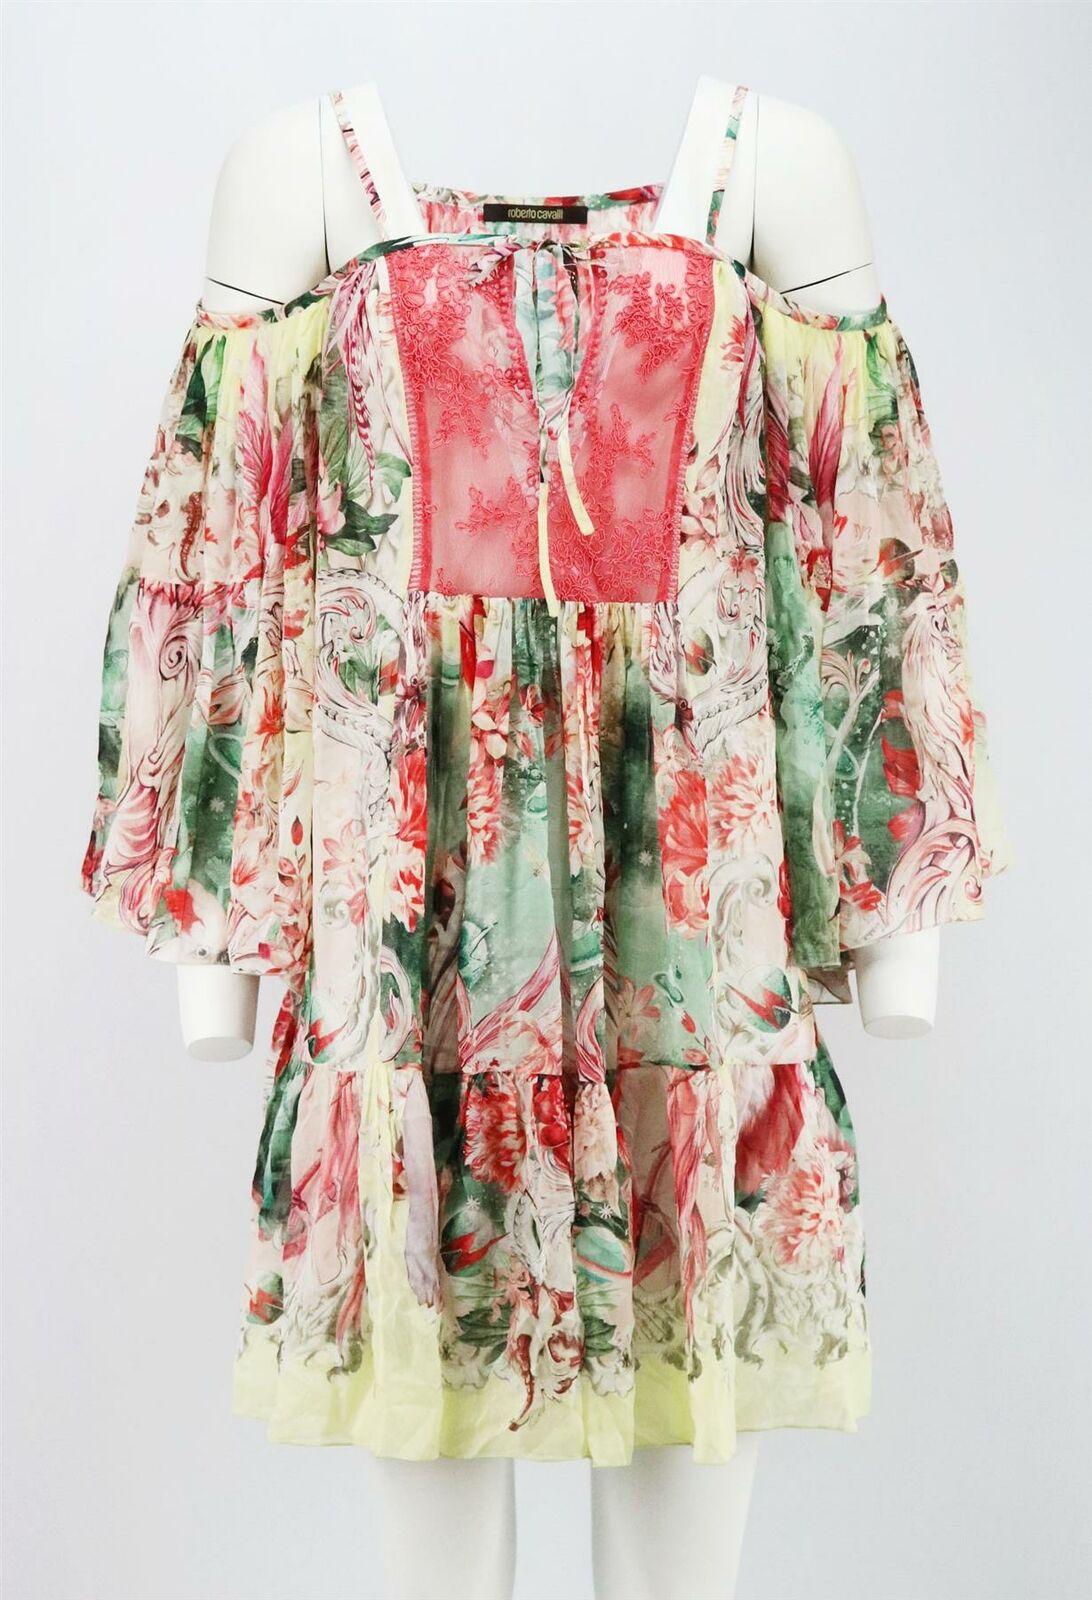 This silk mini dress epitomises Roberto Cavalli's hedonistic bohemian sensibility, it's patterned with a bold floral-print in shades of green, pink and yellow and flutters over the frame with a lace-panelled cold-shoulder neckline.
Multicoloured